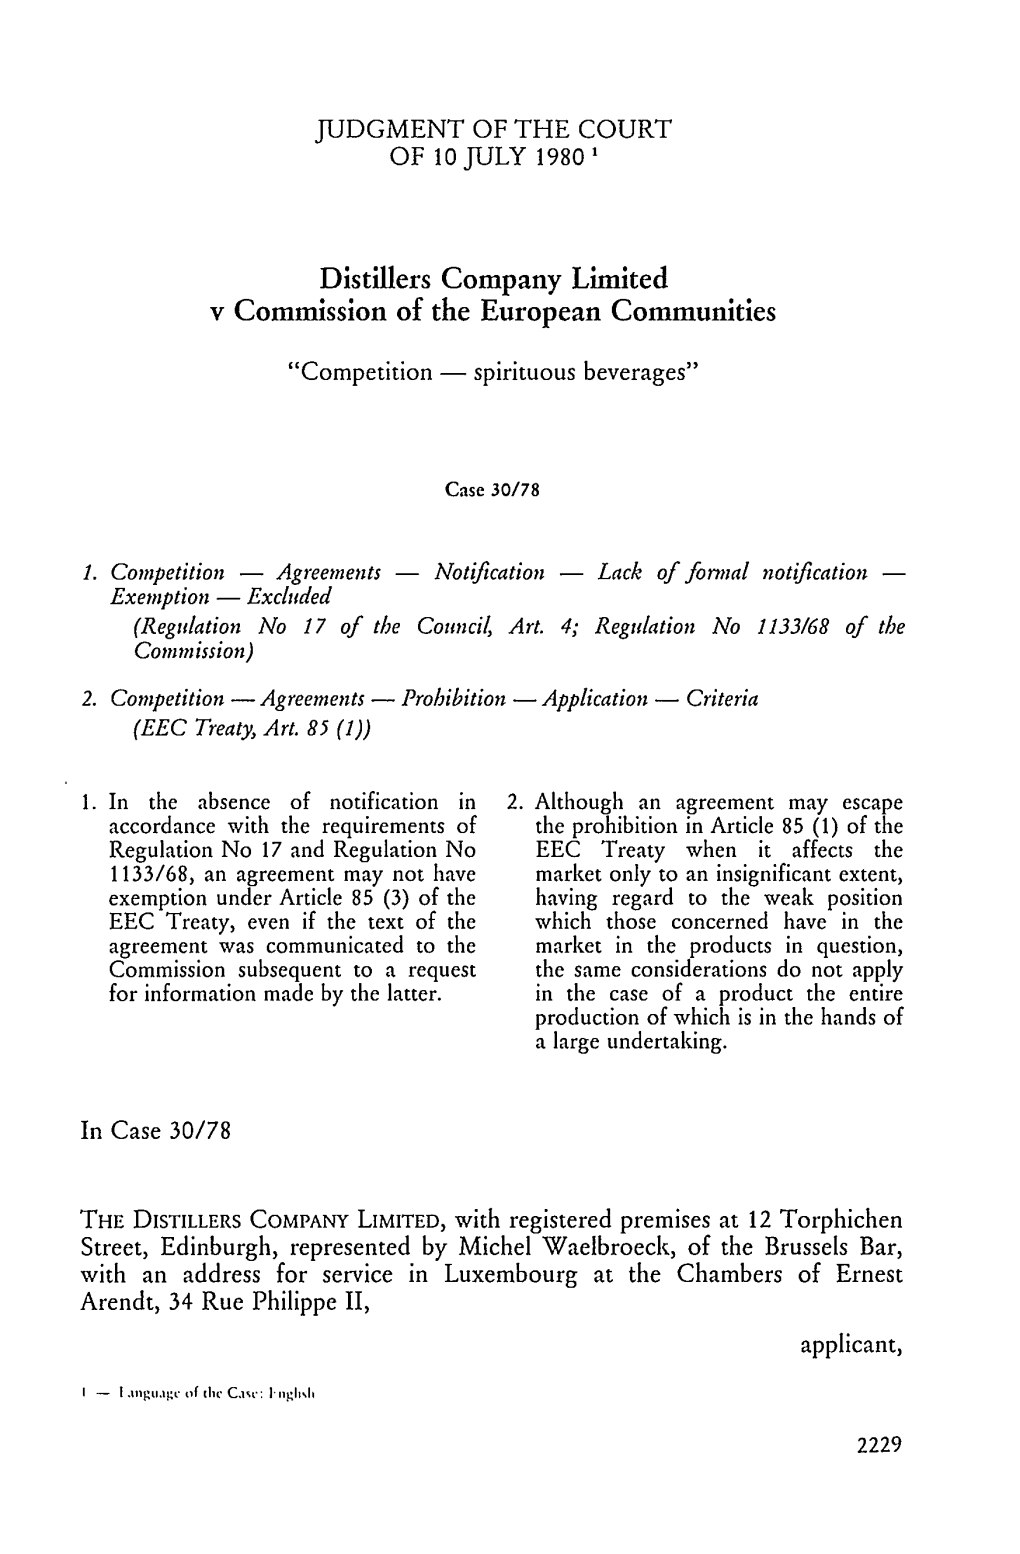 Distillers Company Limited V Commission of the European Communities